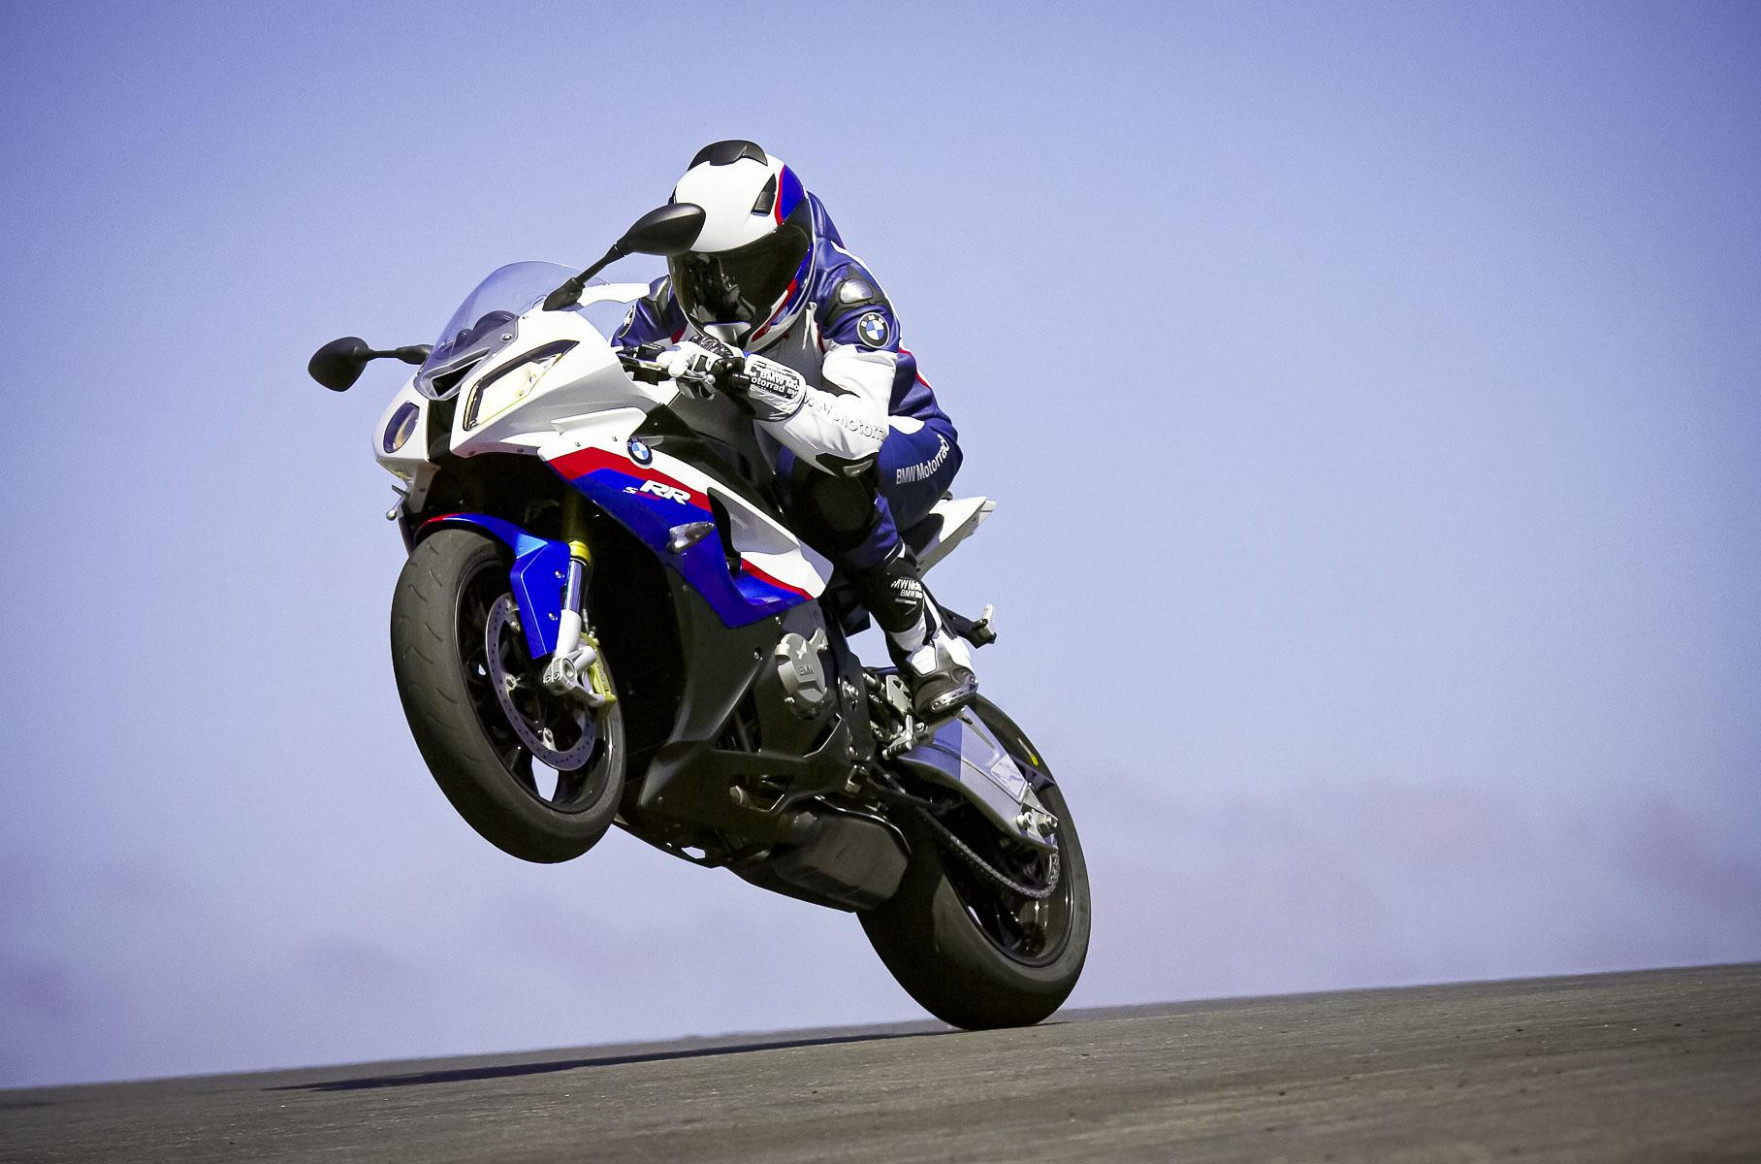 Release 2022 BMW S1000Rr